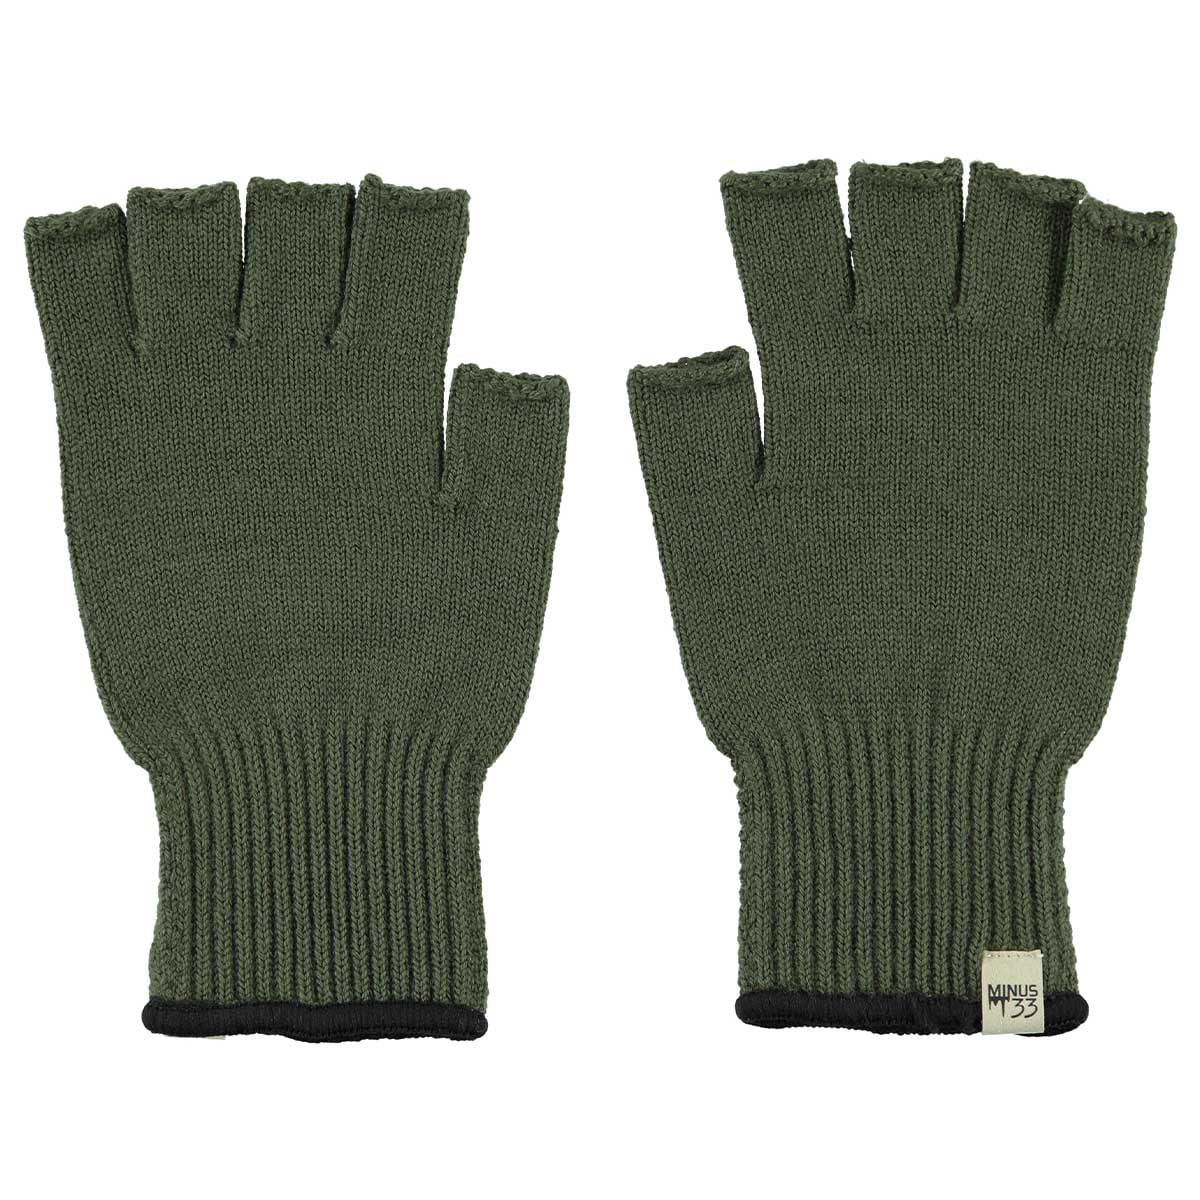 MENS FINGERLESS SHOOTER MITTS 100% ACRYLIC ARMY GLOVES MITTENS SHOOTING HUNTING 